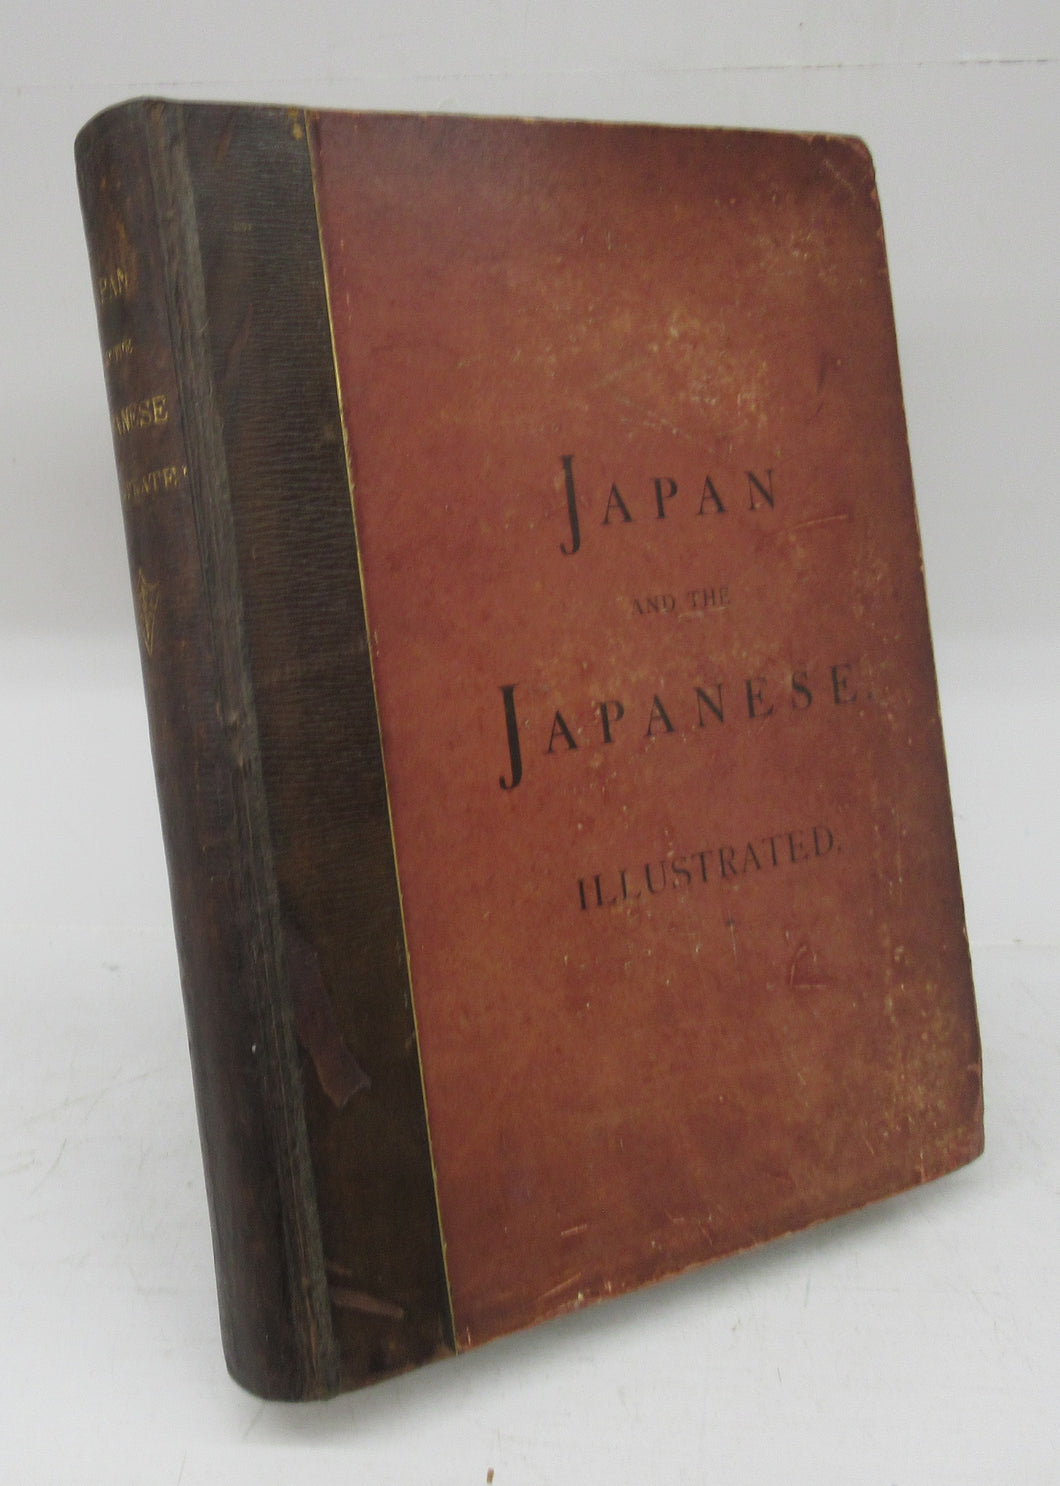 Japan and the Japanese, Illustrated